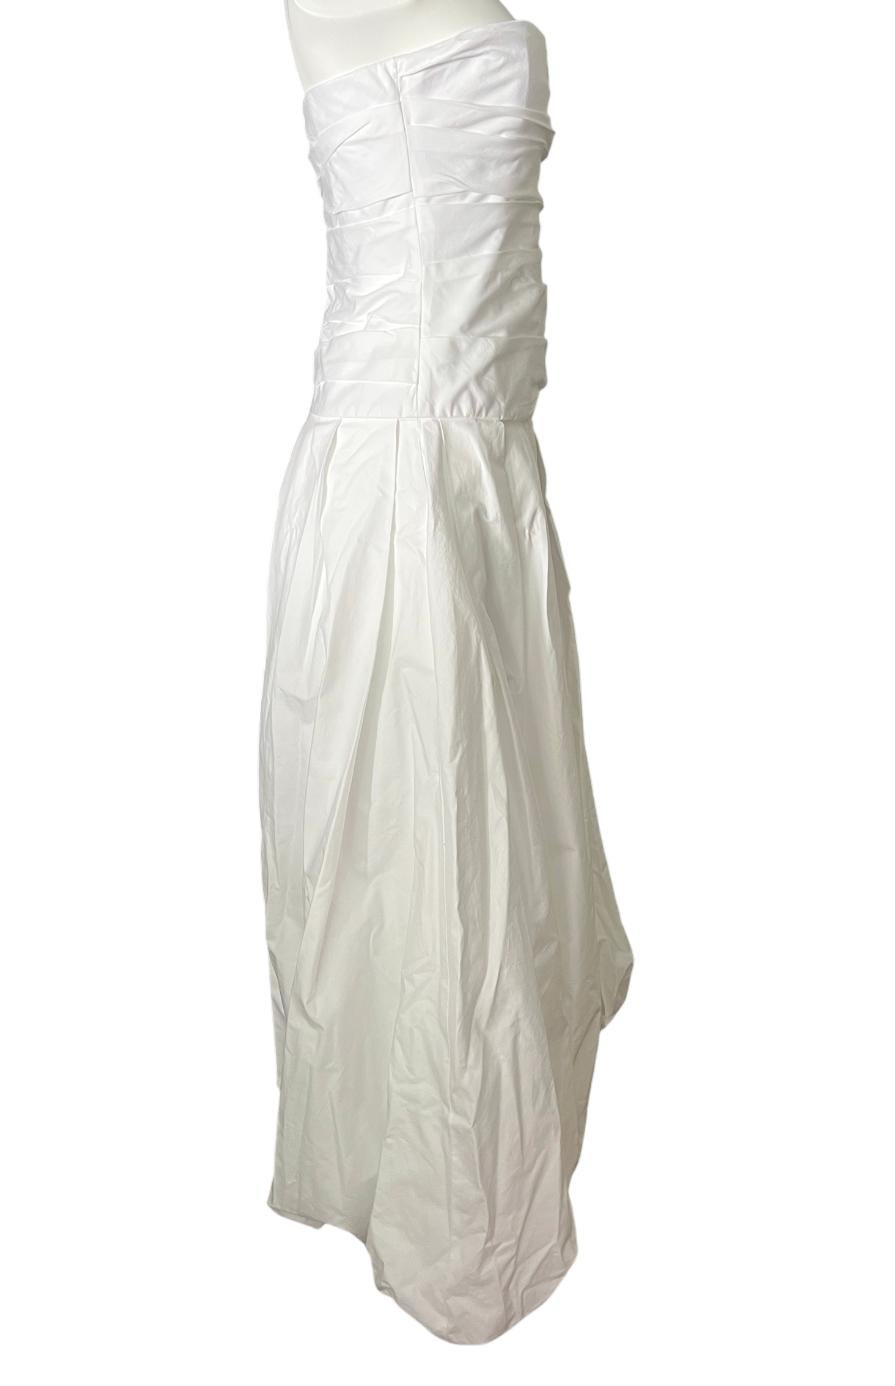 - Sleeveless
- Floor length
- Ruffled and flare design
- Concealed rear zip closure with hook
- Side pocket detail
